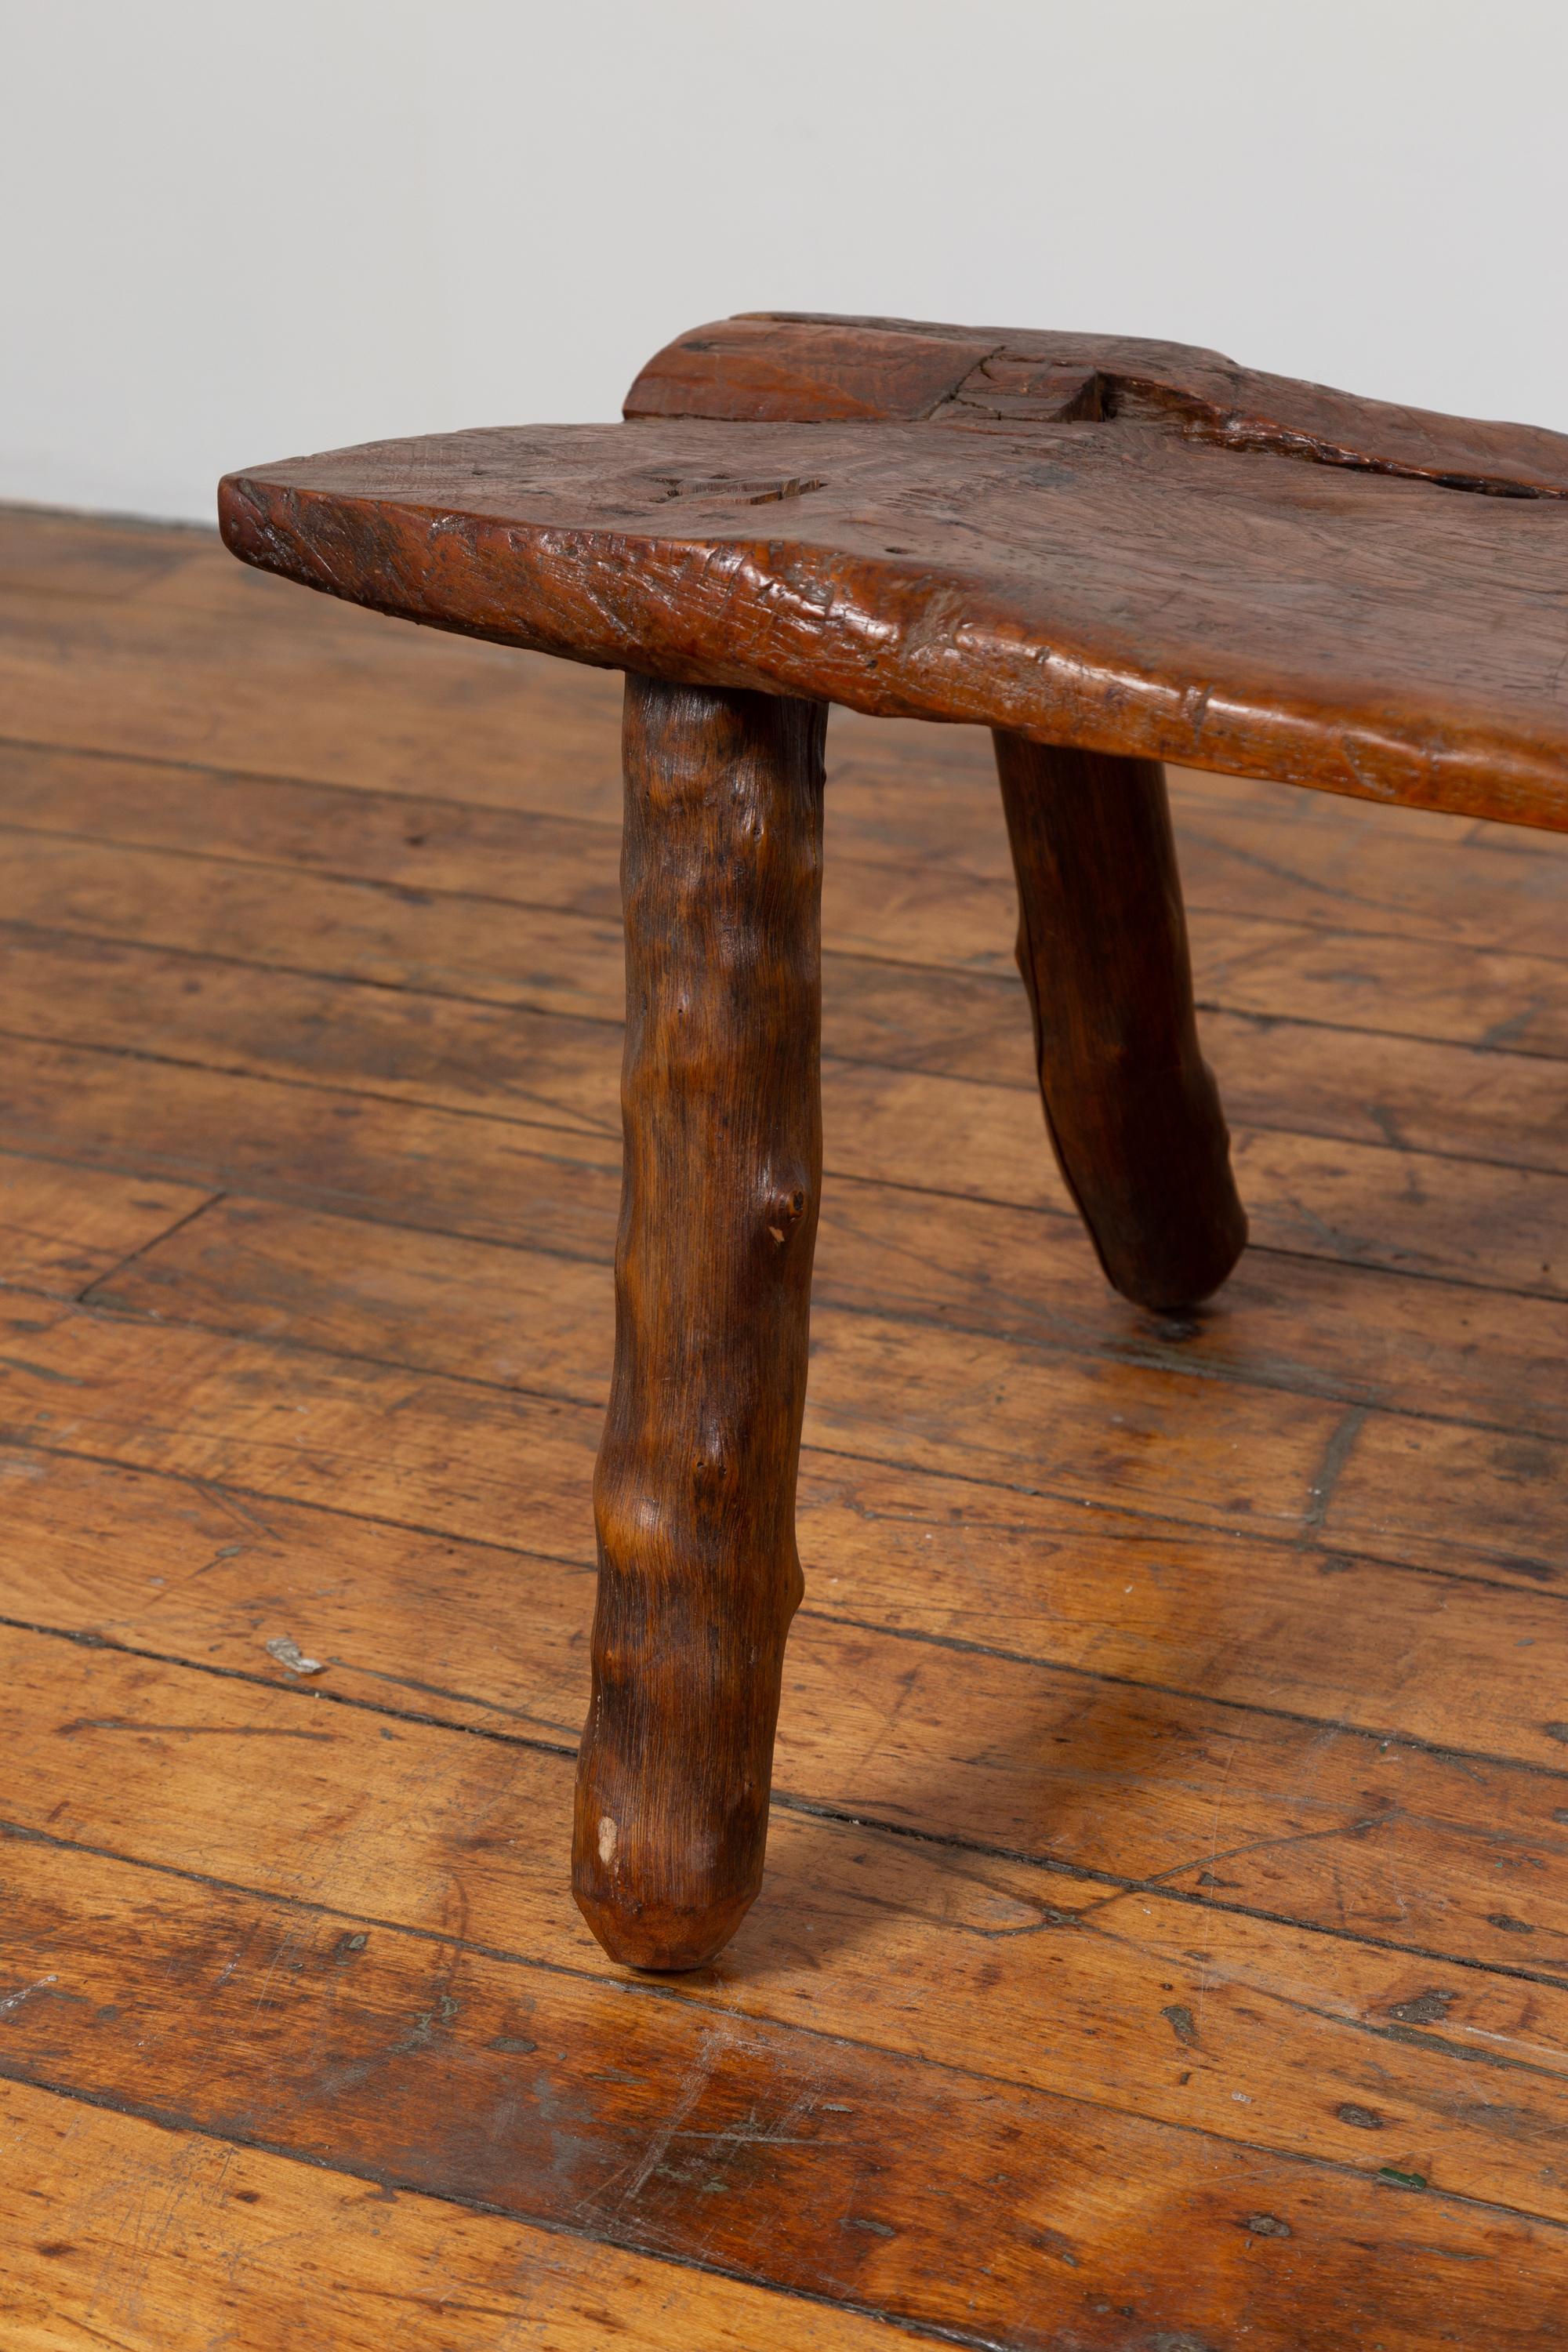 Rustic 19th Century Freeform Javanese Wooden Bench with Weathered Patina 1